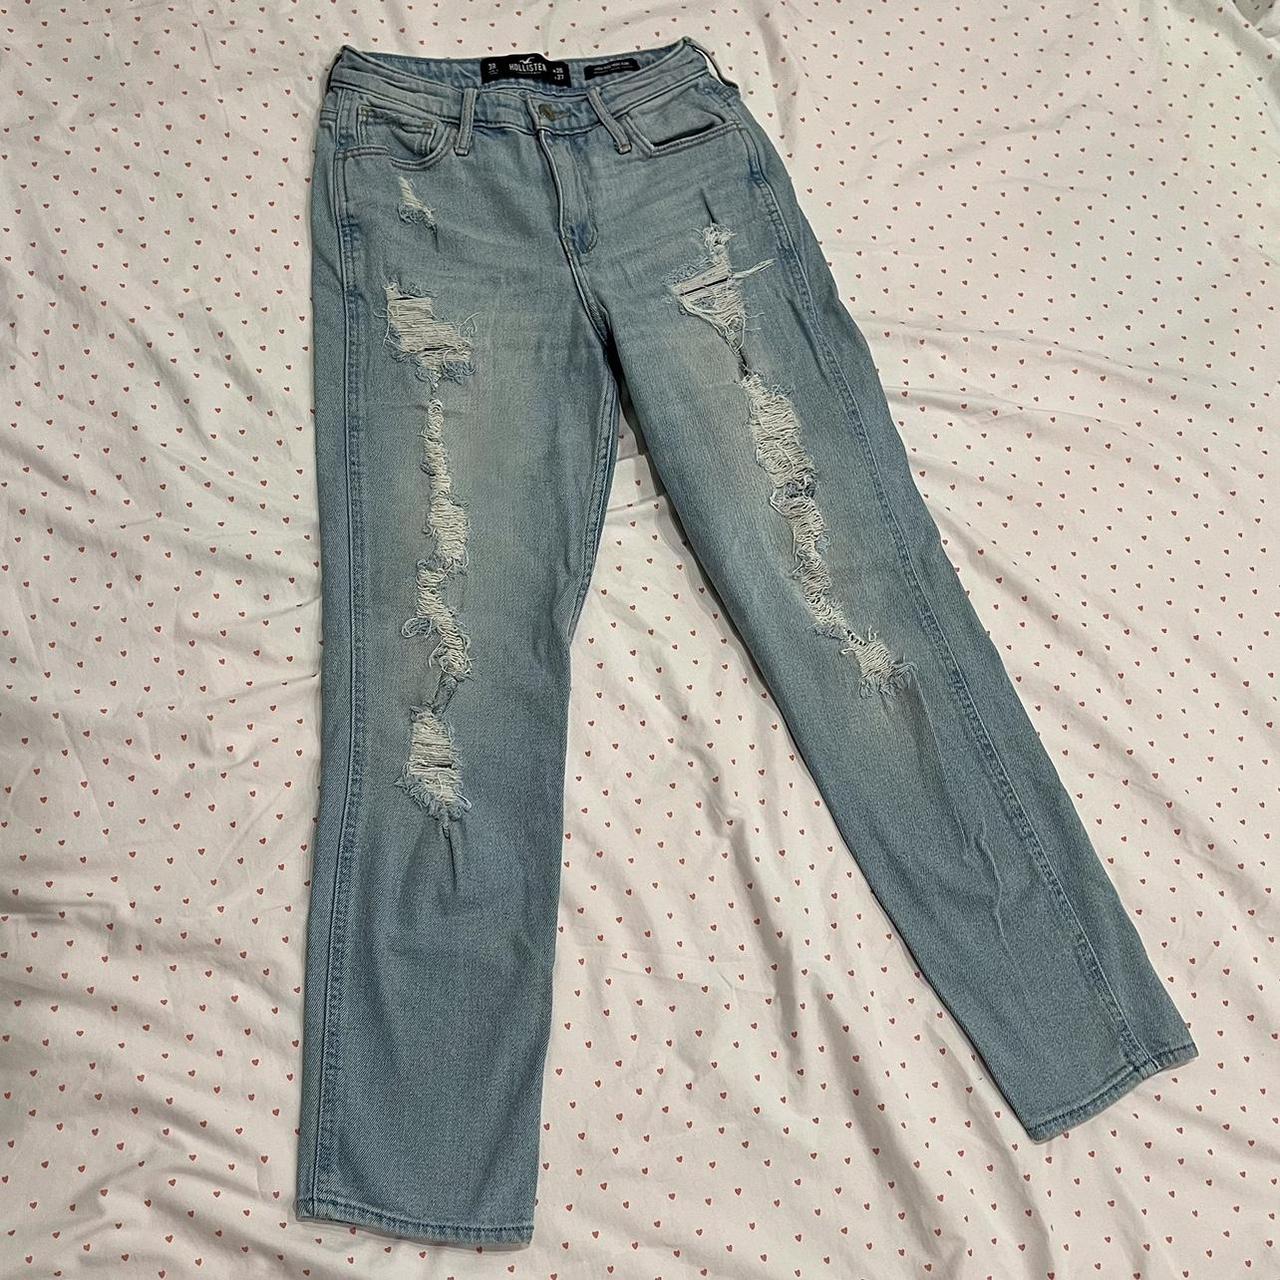 hollister straight leg light wash jeans with a rip